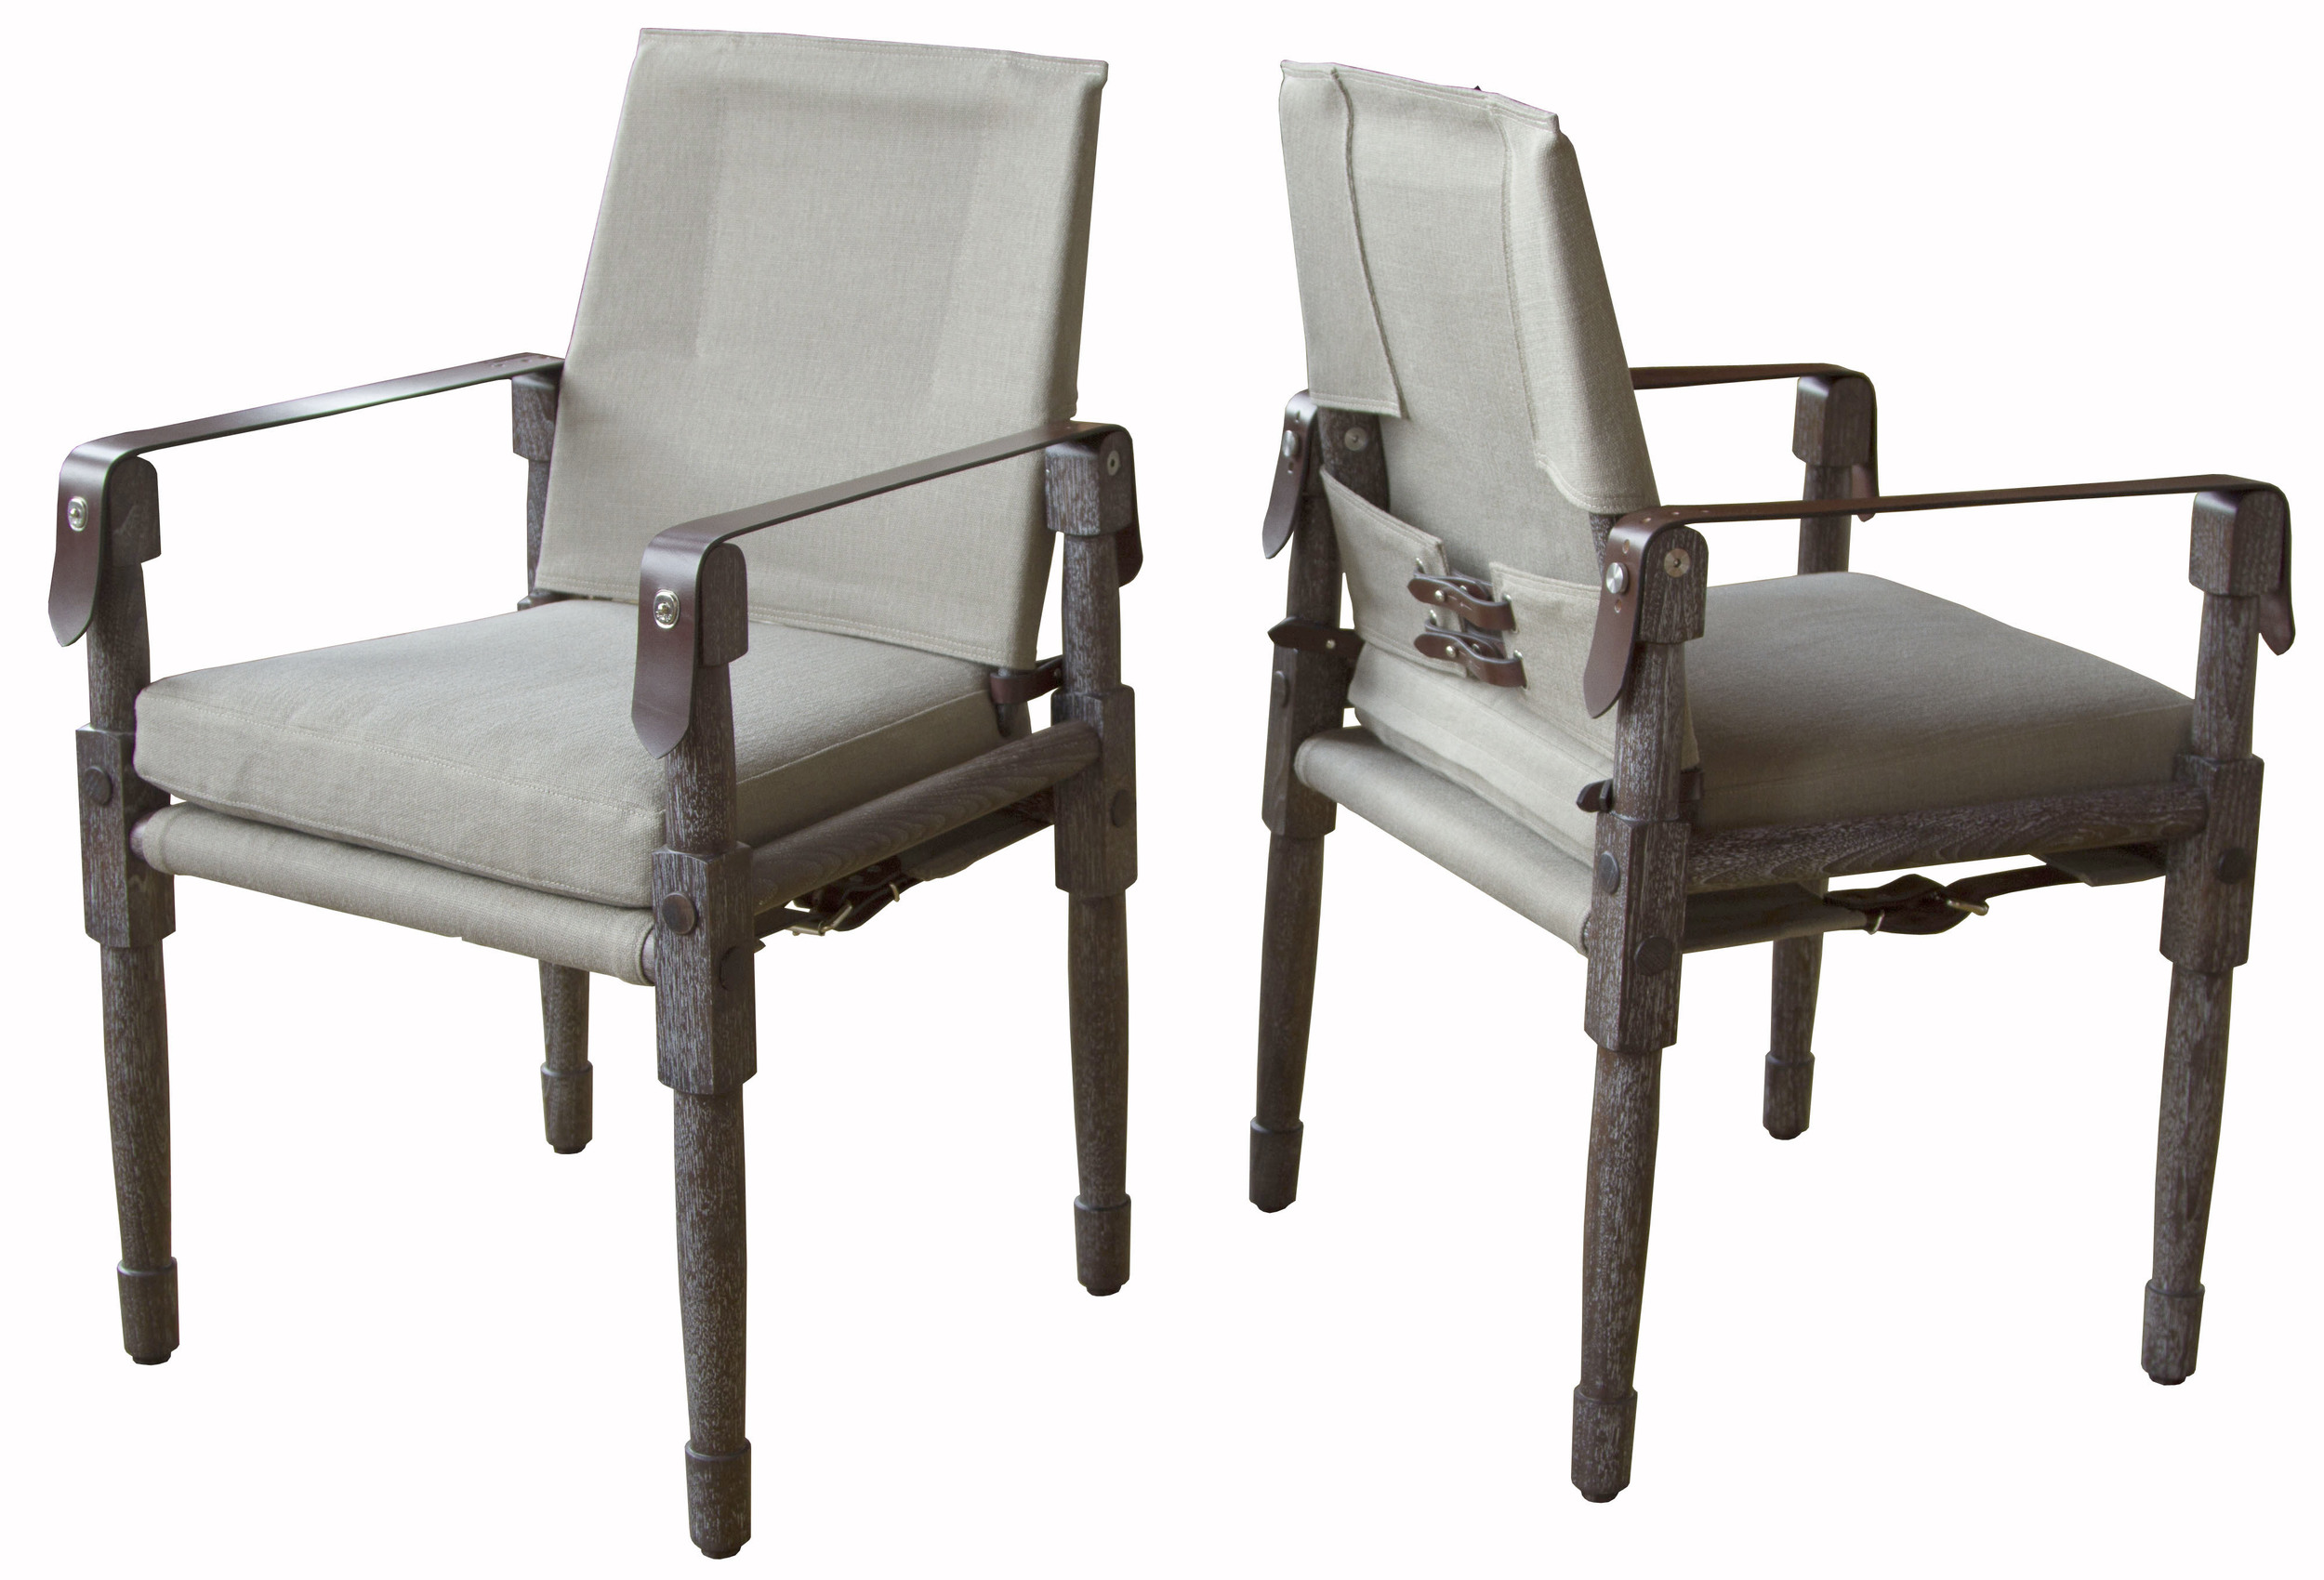  Chatwin Chairs with havana straps 